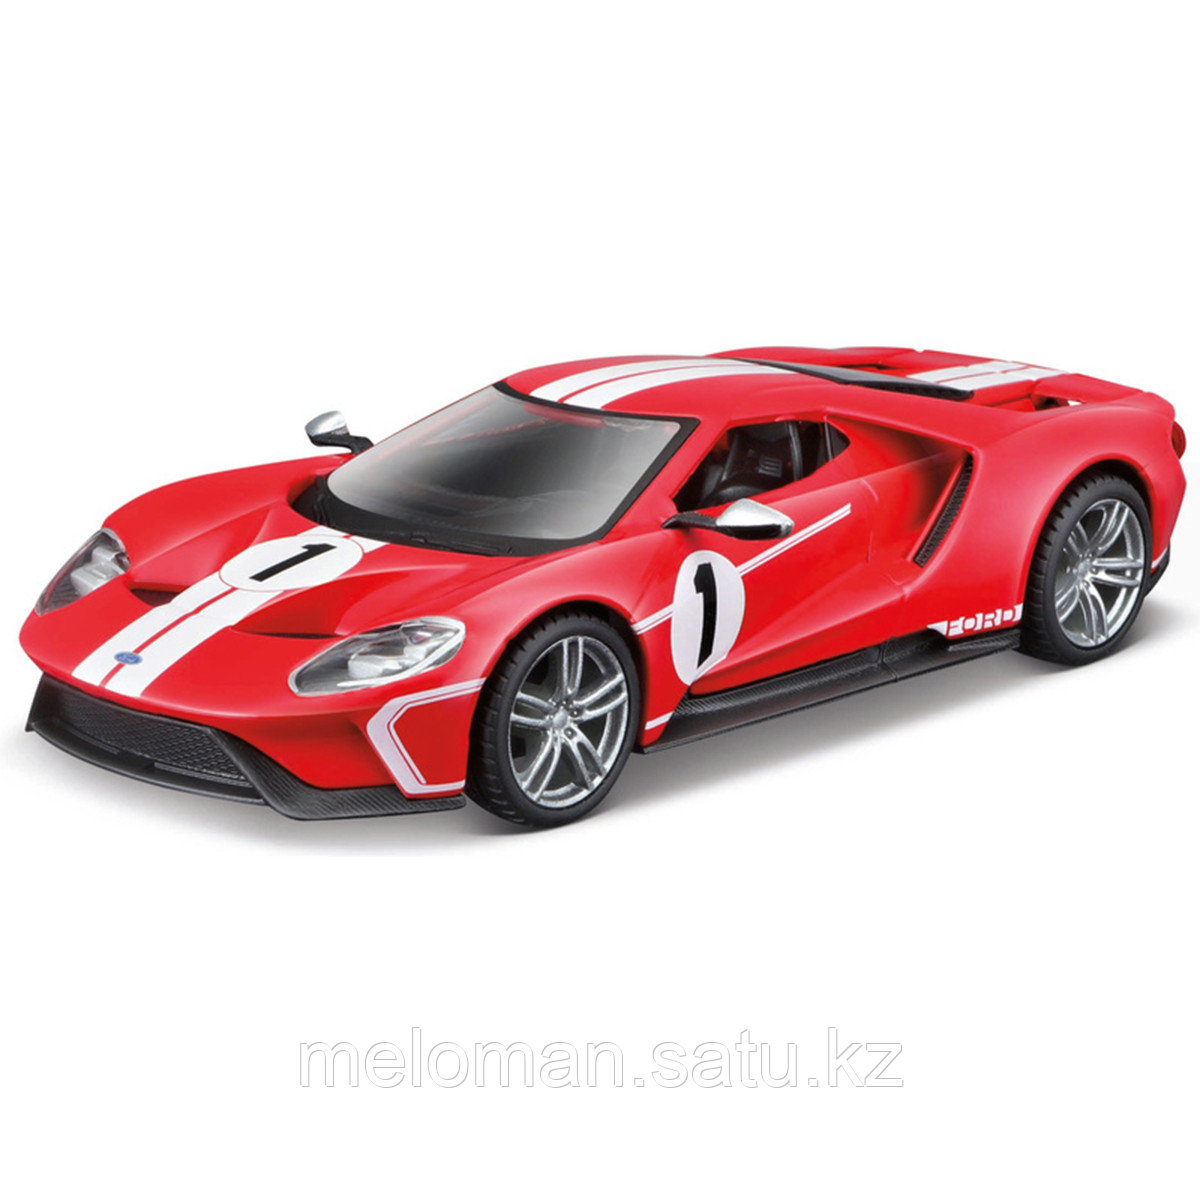 BBURAGO: 1:32 Ford GT Heritage Edition 2018 #1 Red - фото 1 - id-p103076994